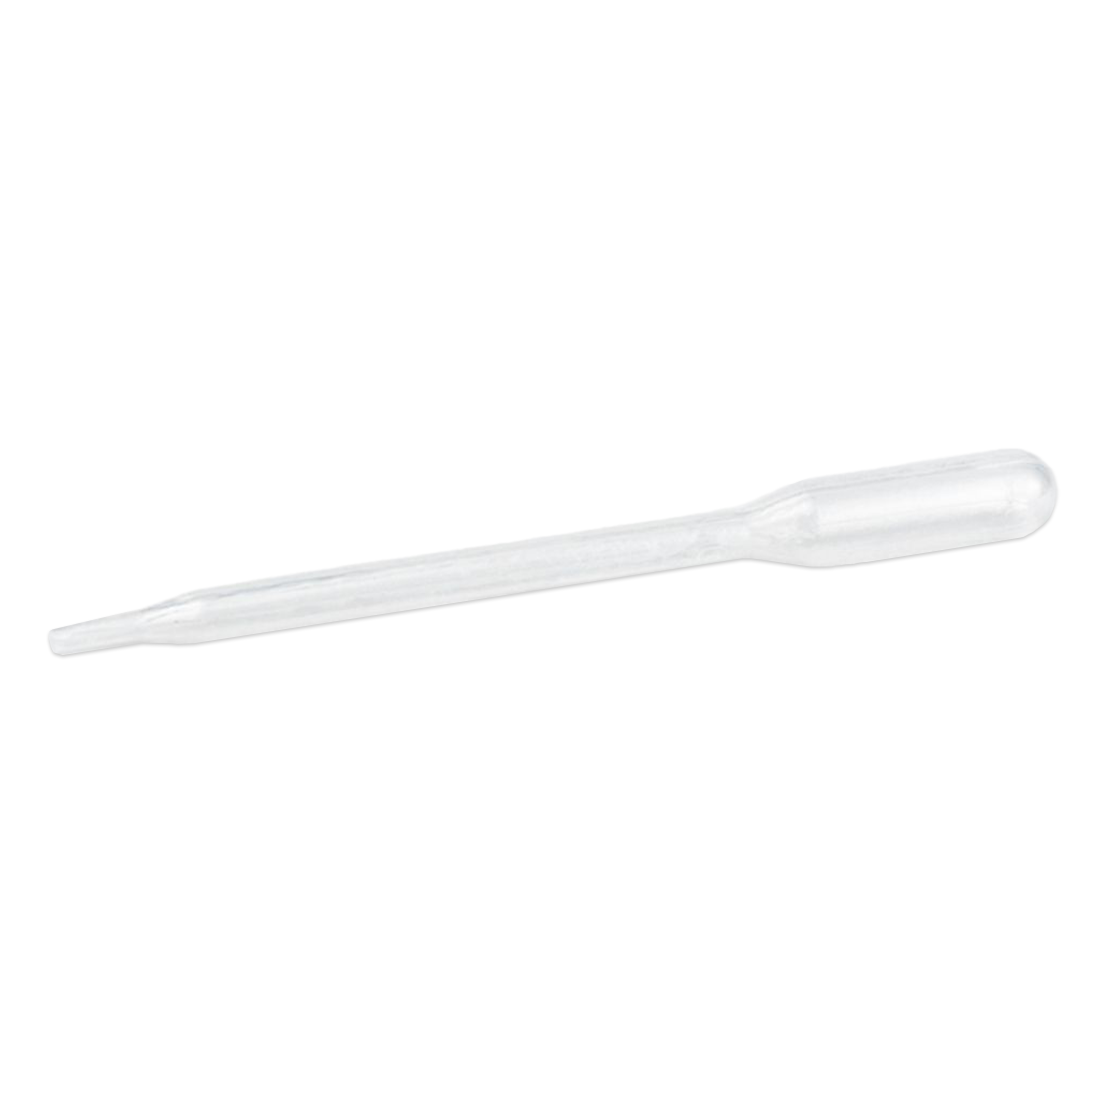 LH Ovulation Test Cassette pipette